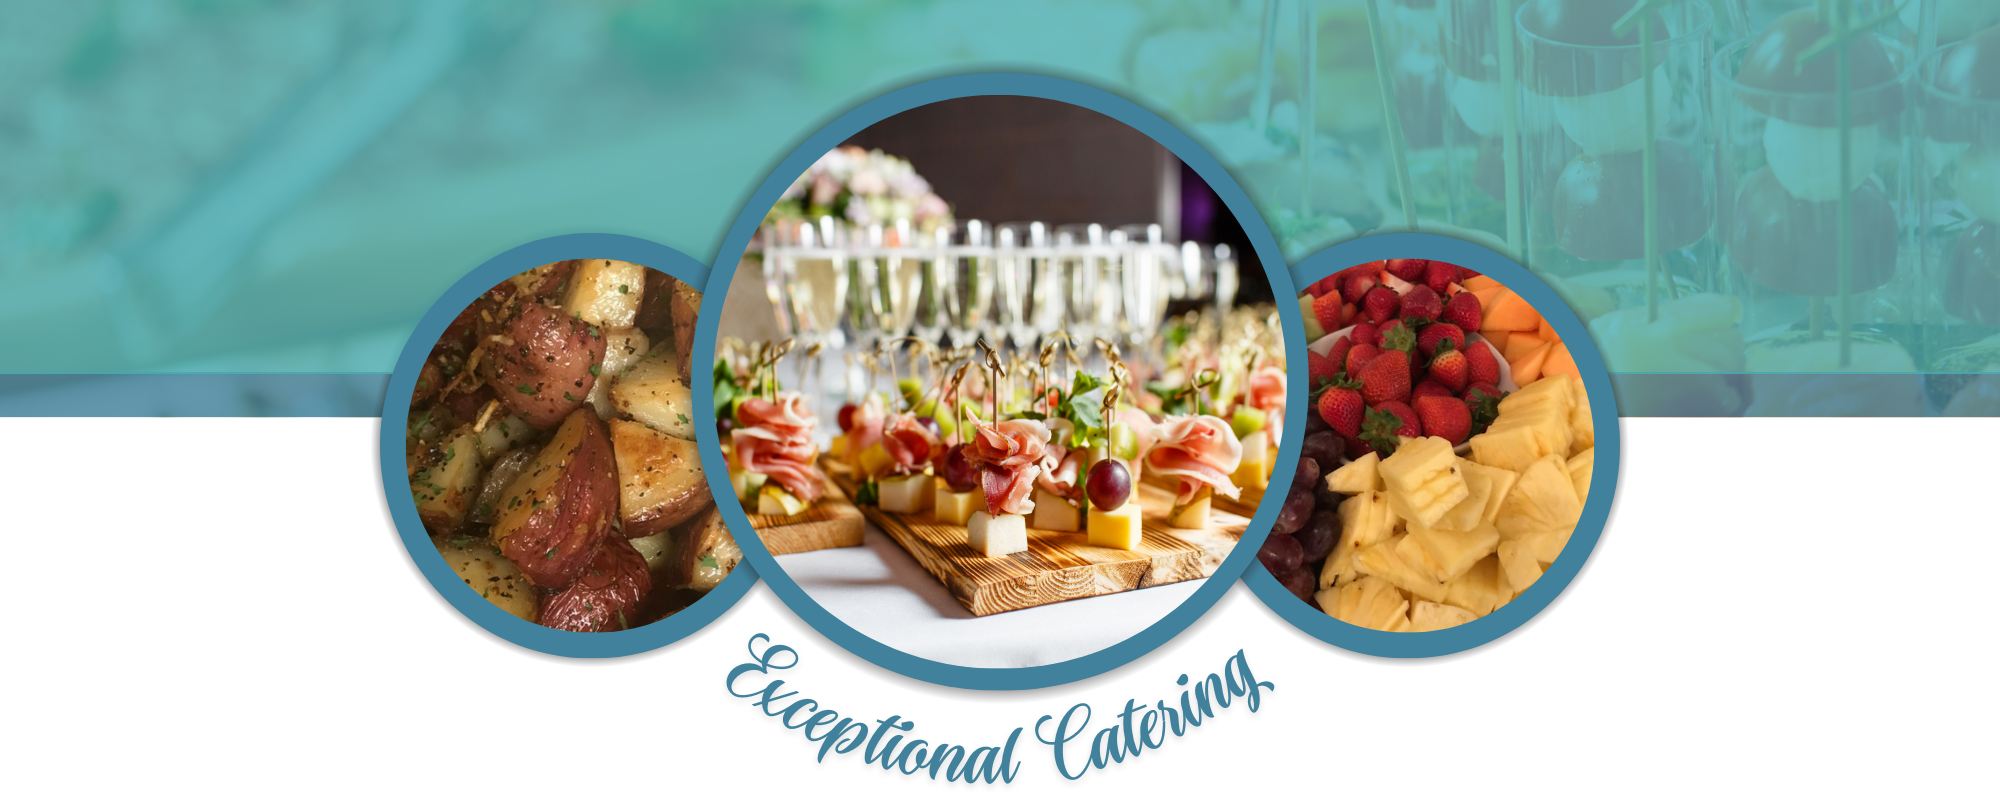 collage featuring catered fresh salads, appetizers and fruit